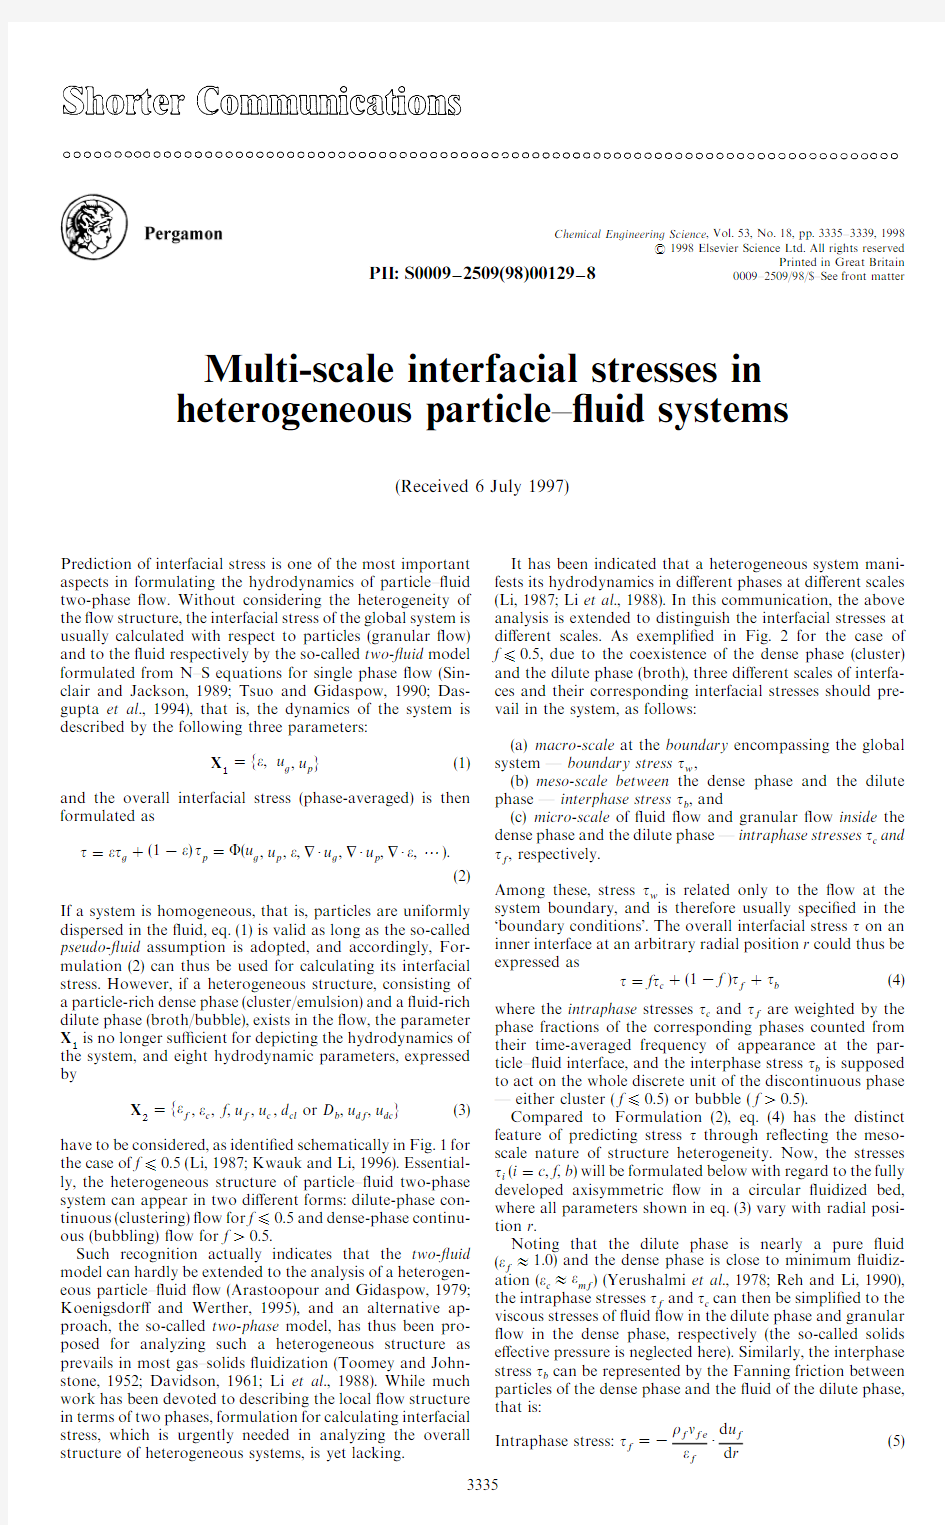 1998 Multi-scale interfacial stresses in heterogeneous particle fluid systems